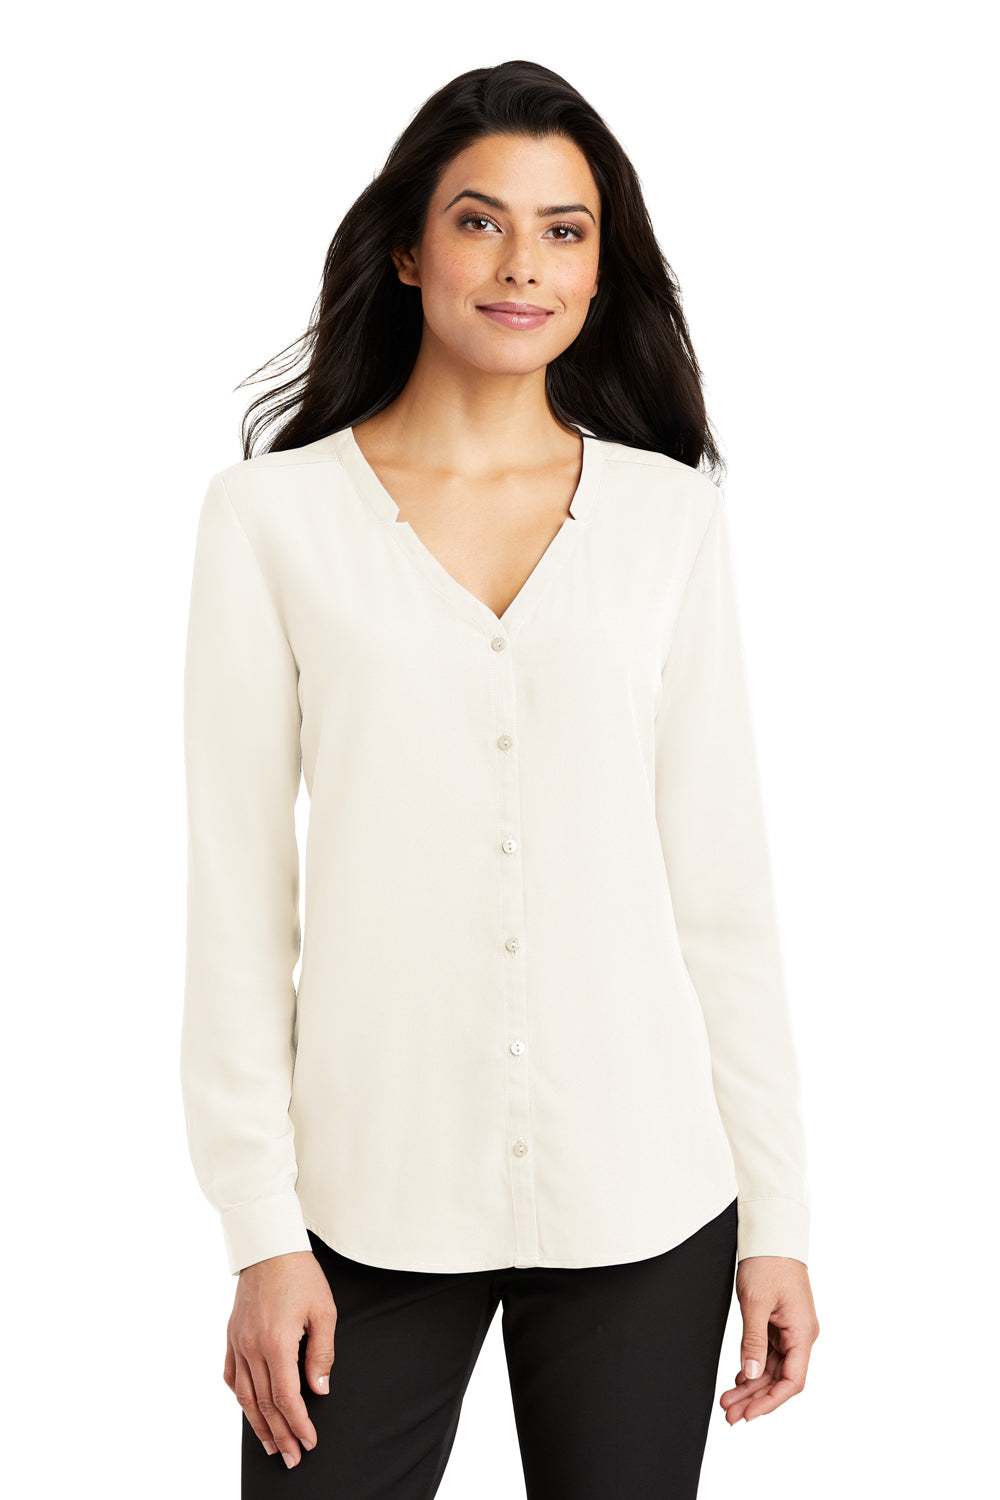 Port Authority LW700 Womens Long Sleeve Button Down Shirt Ivory White Front